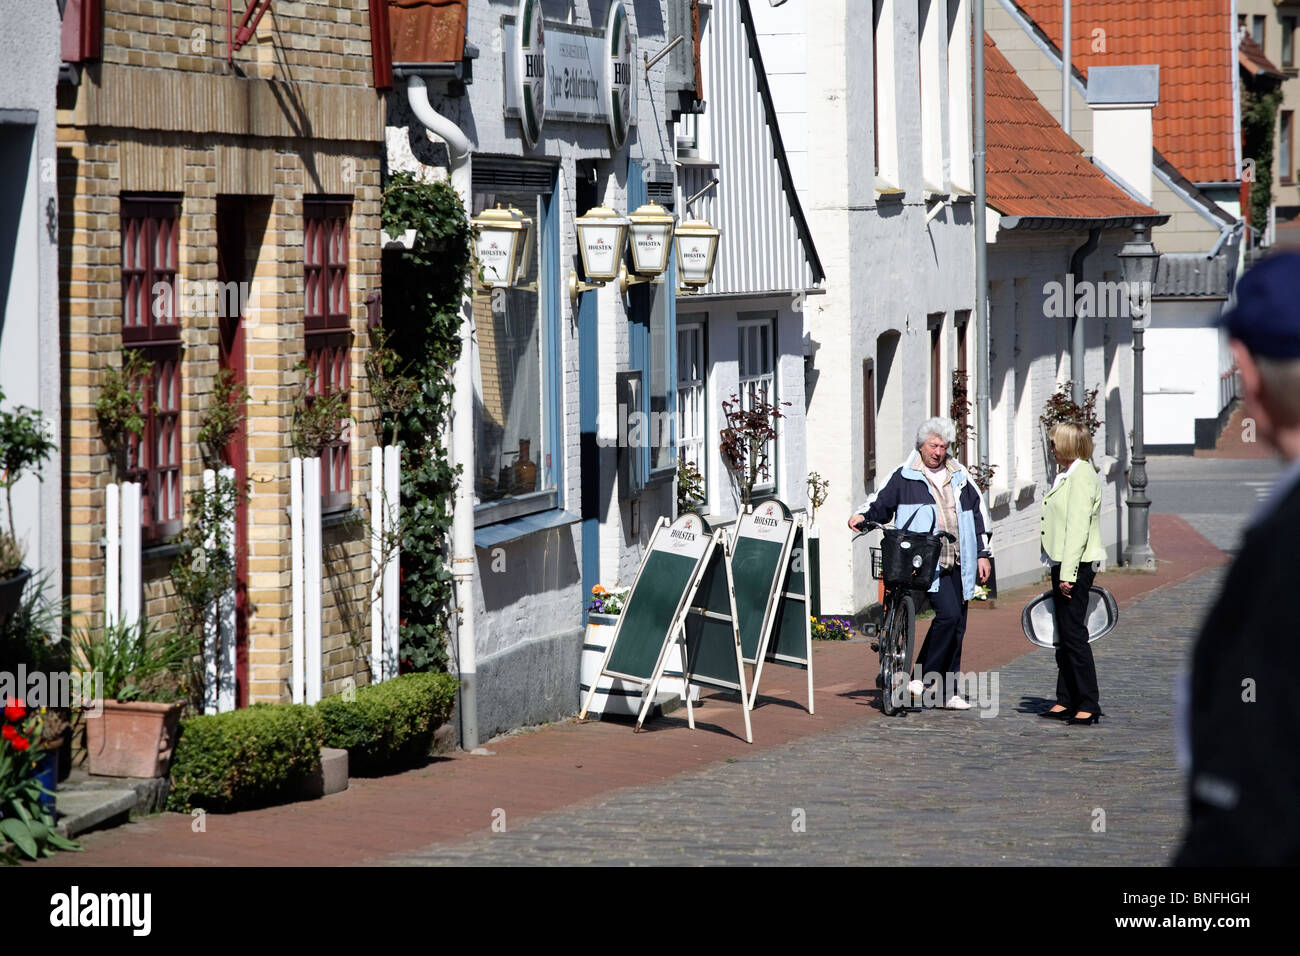 Holm in Schleswig, Germany Stock Photo